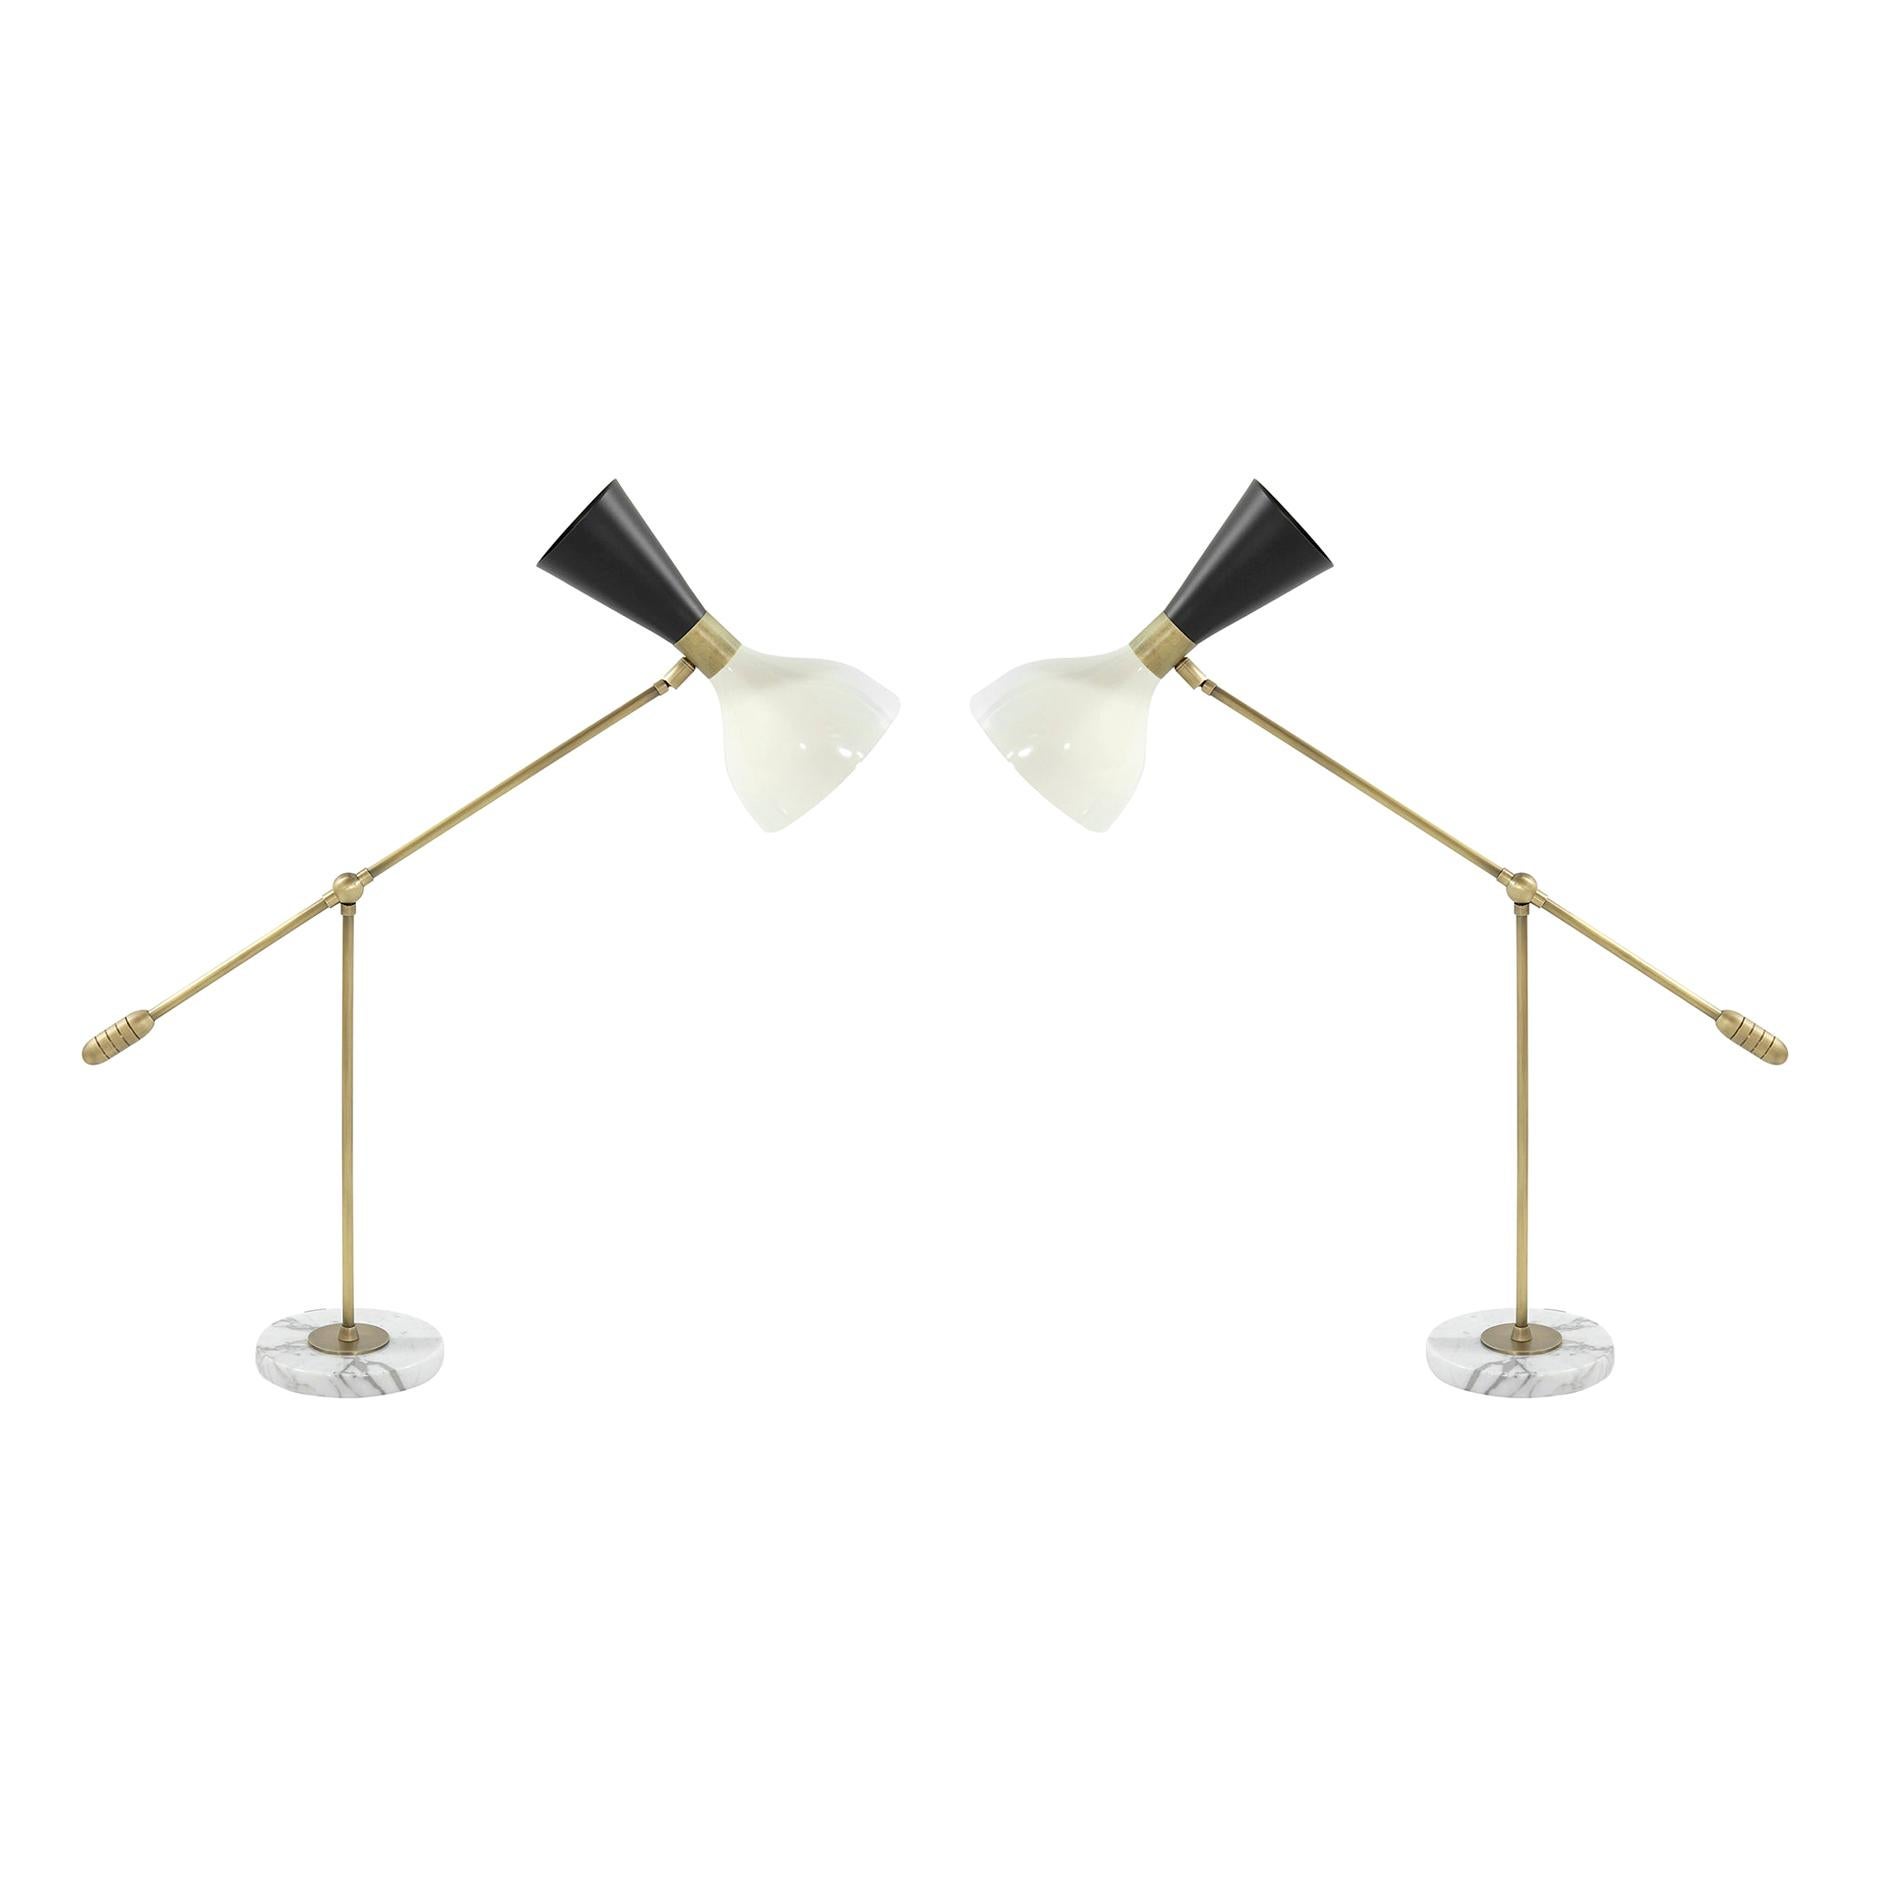 "Ludo" Table Lamps